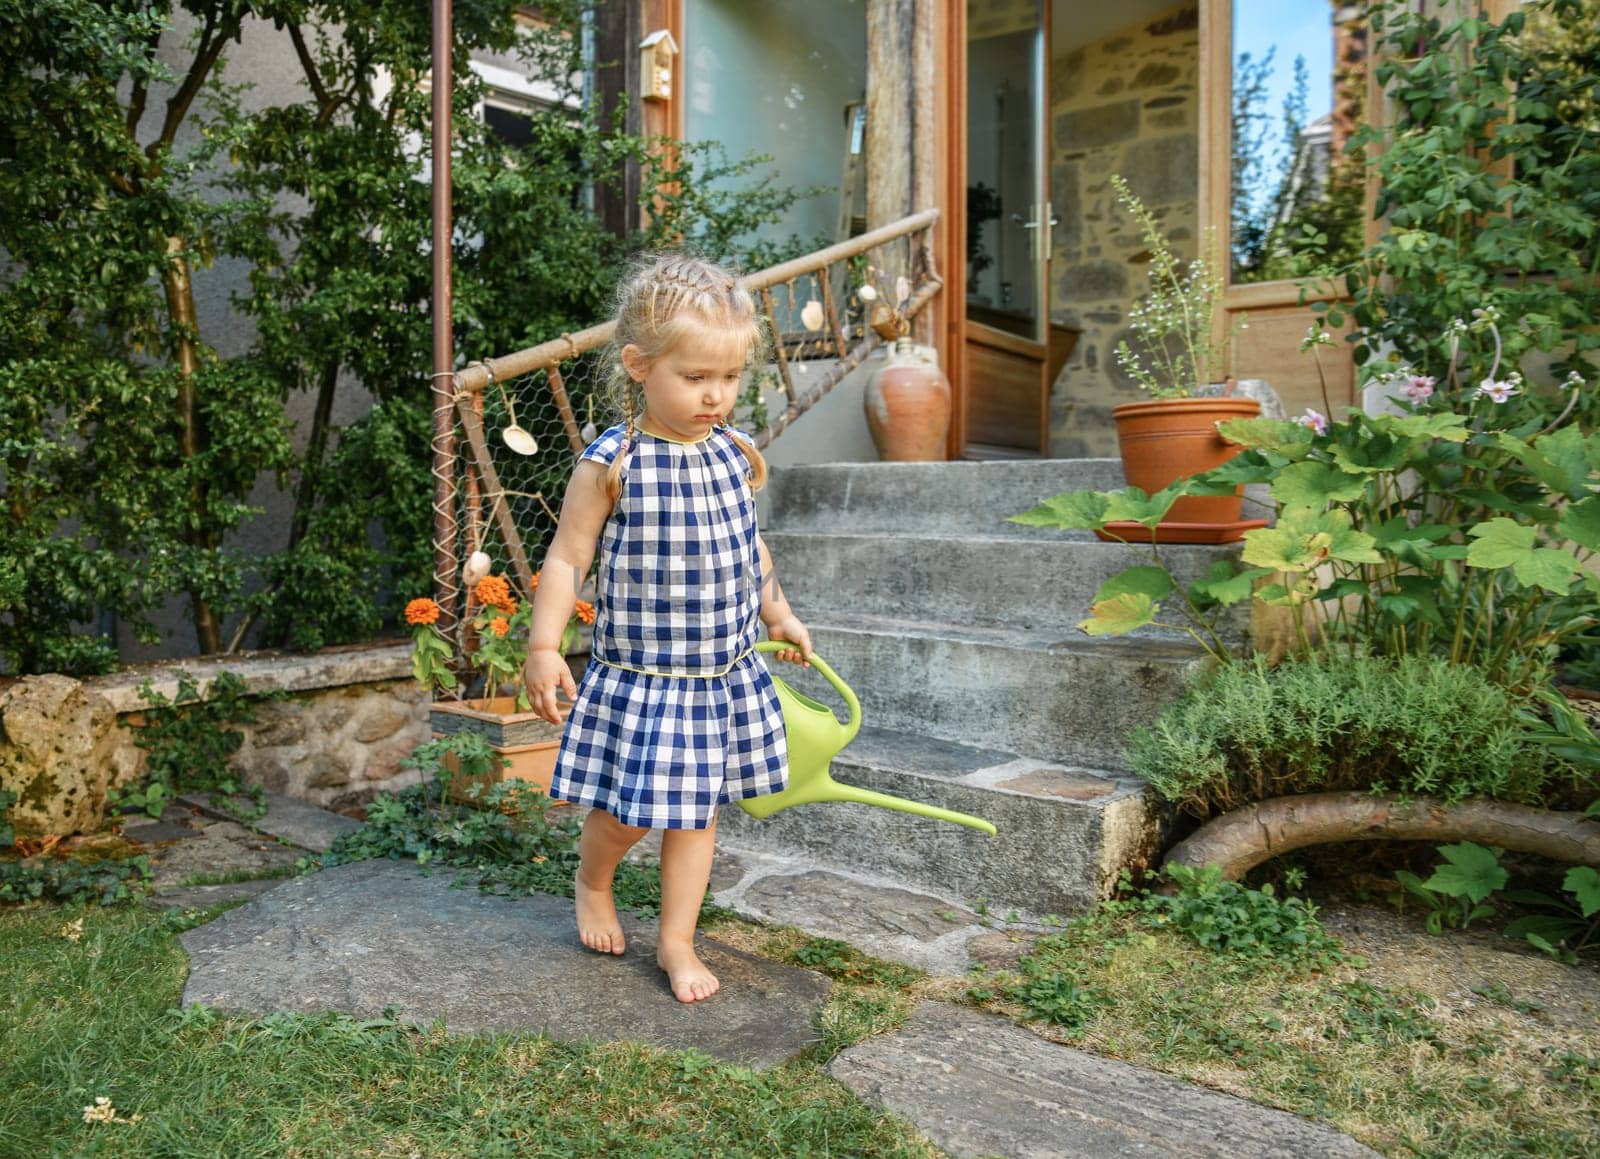 Little girl in a garden with green watering pot